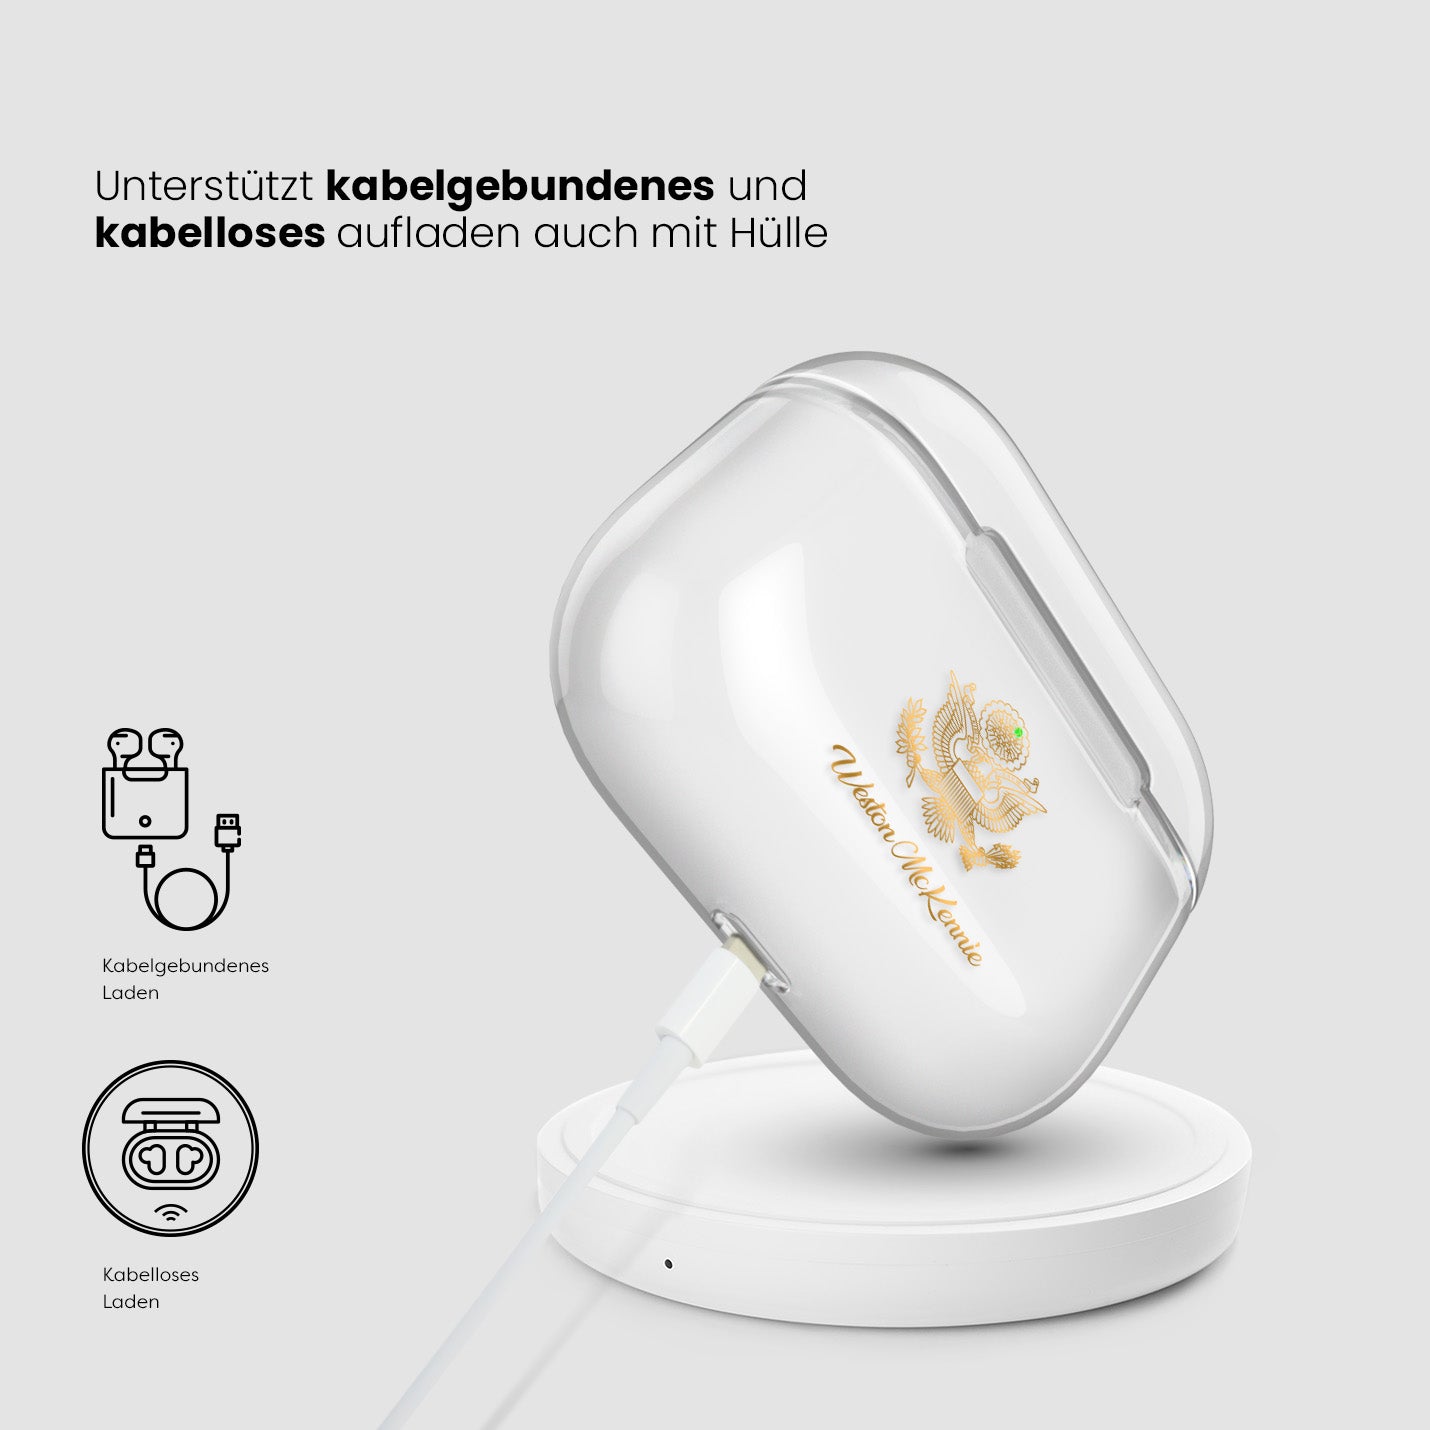 Airpods Hülle - United States of America ( USA ) - 1instaphone